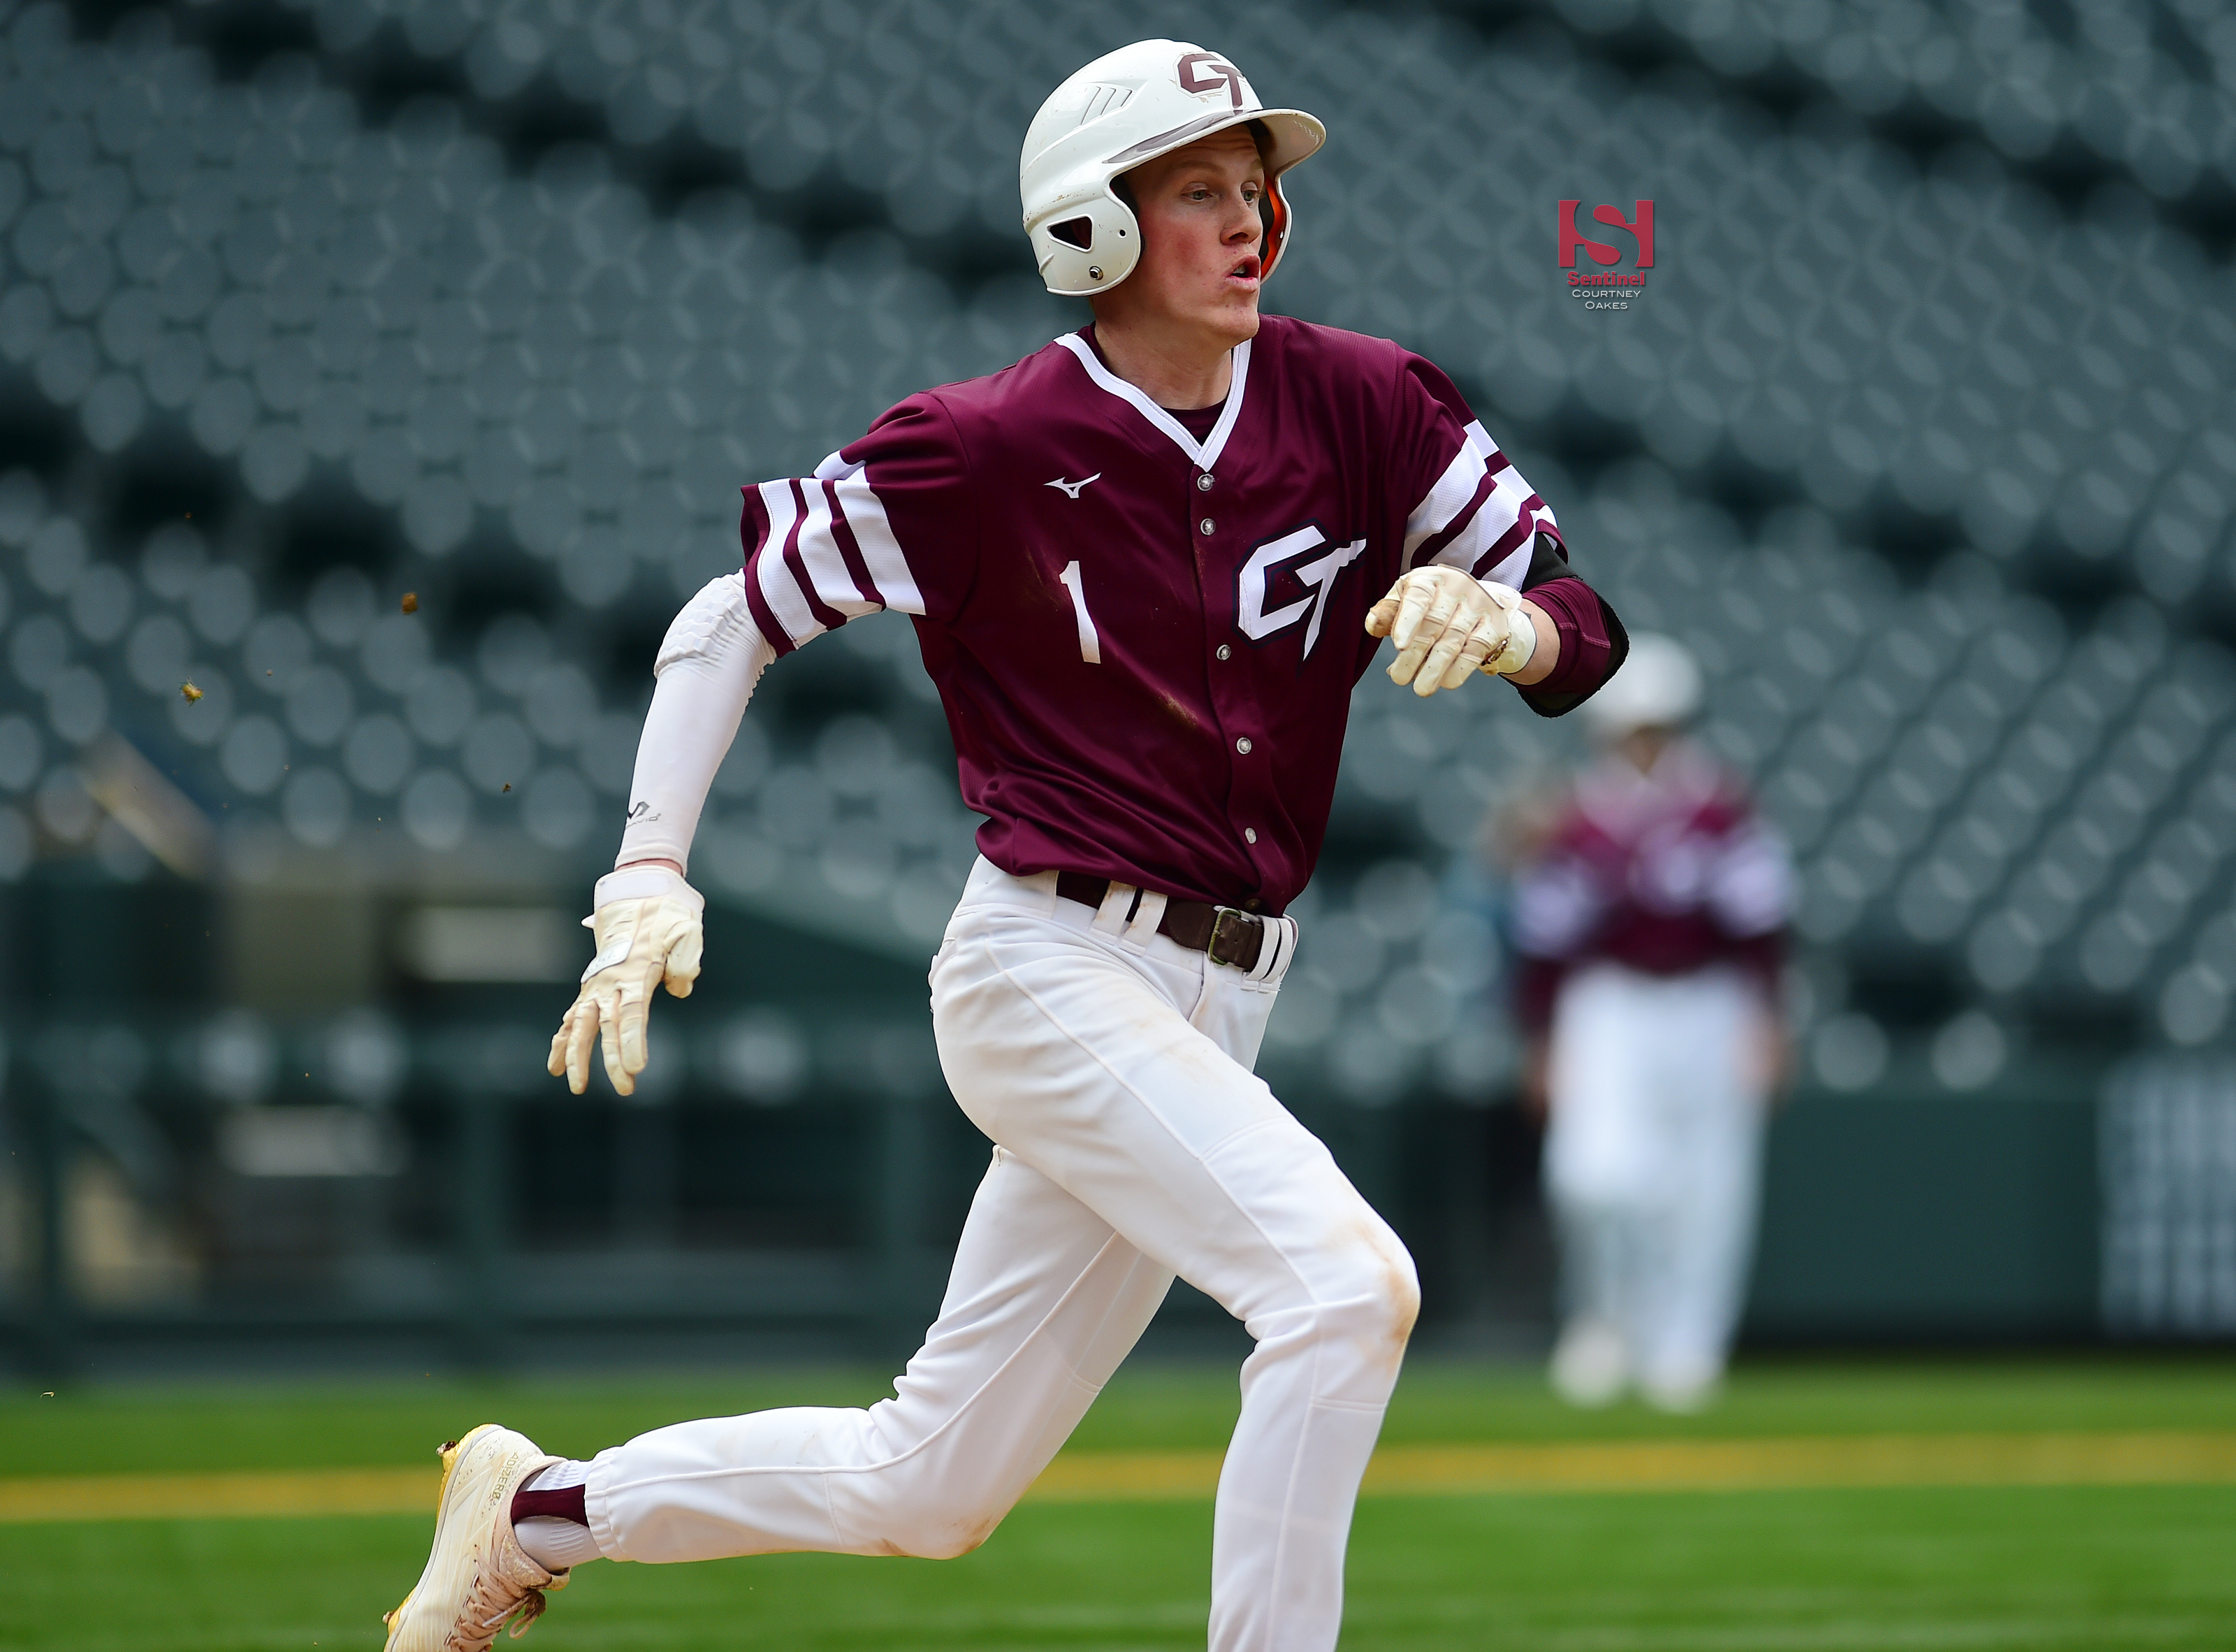 Cherokee Trail senior shortstop Colten Chase led the Centennial League with 39 hits and earned a spot on the All-Centennial League first team for the 2018 baseball season. (Photo by Courtney Oakes/Sentinel)